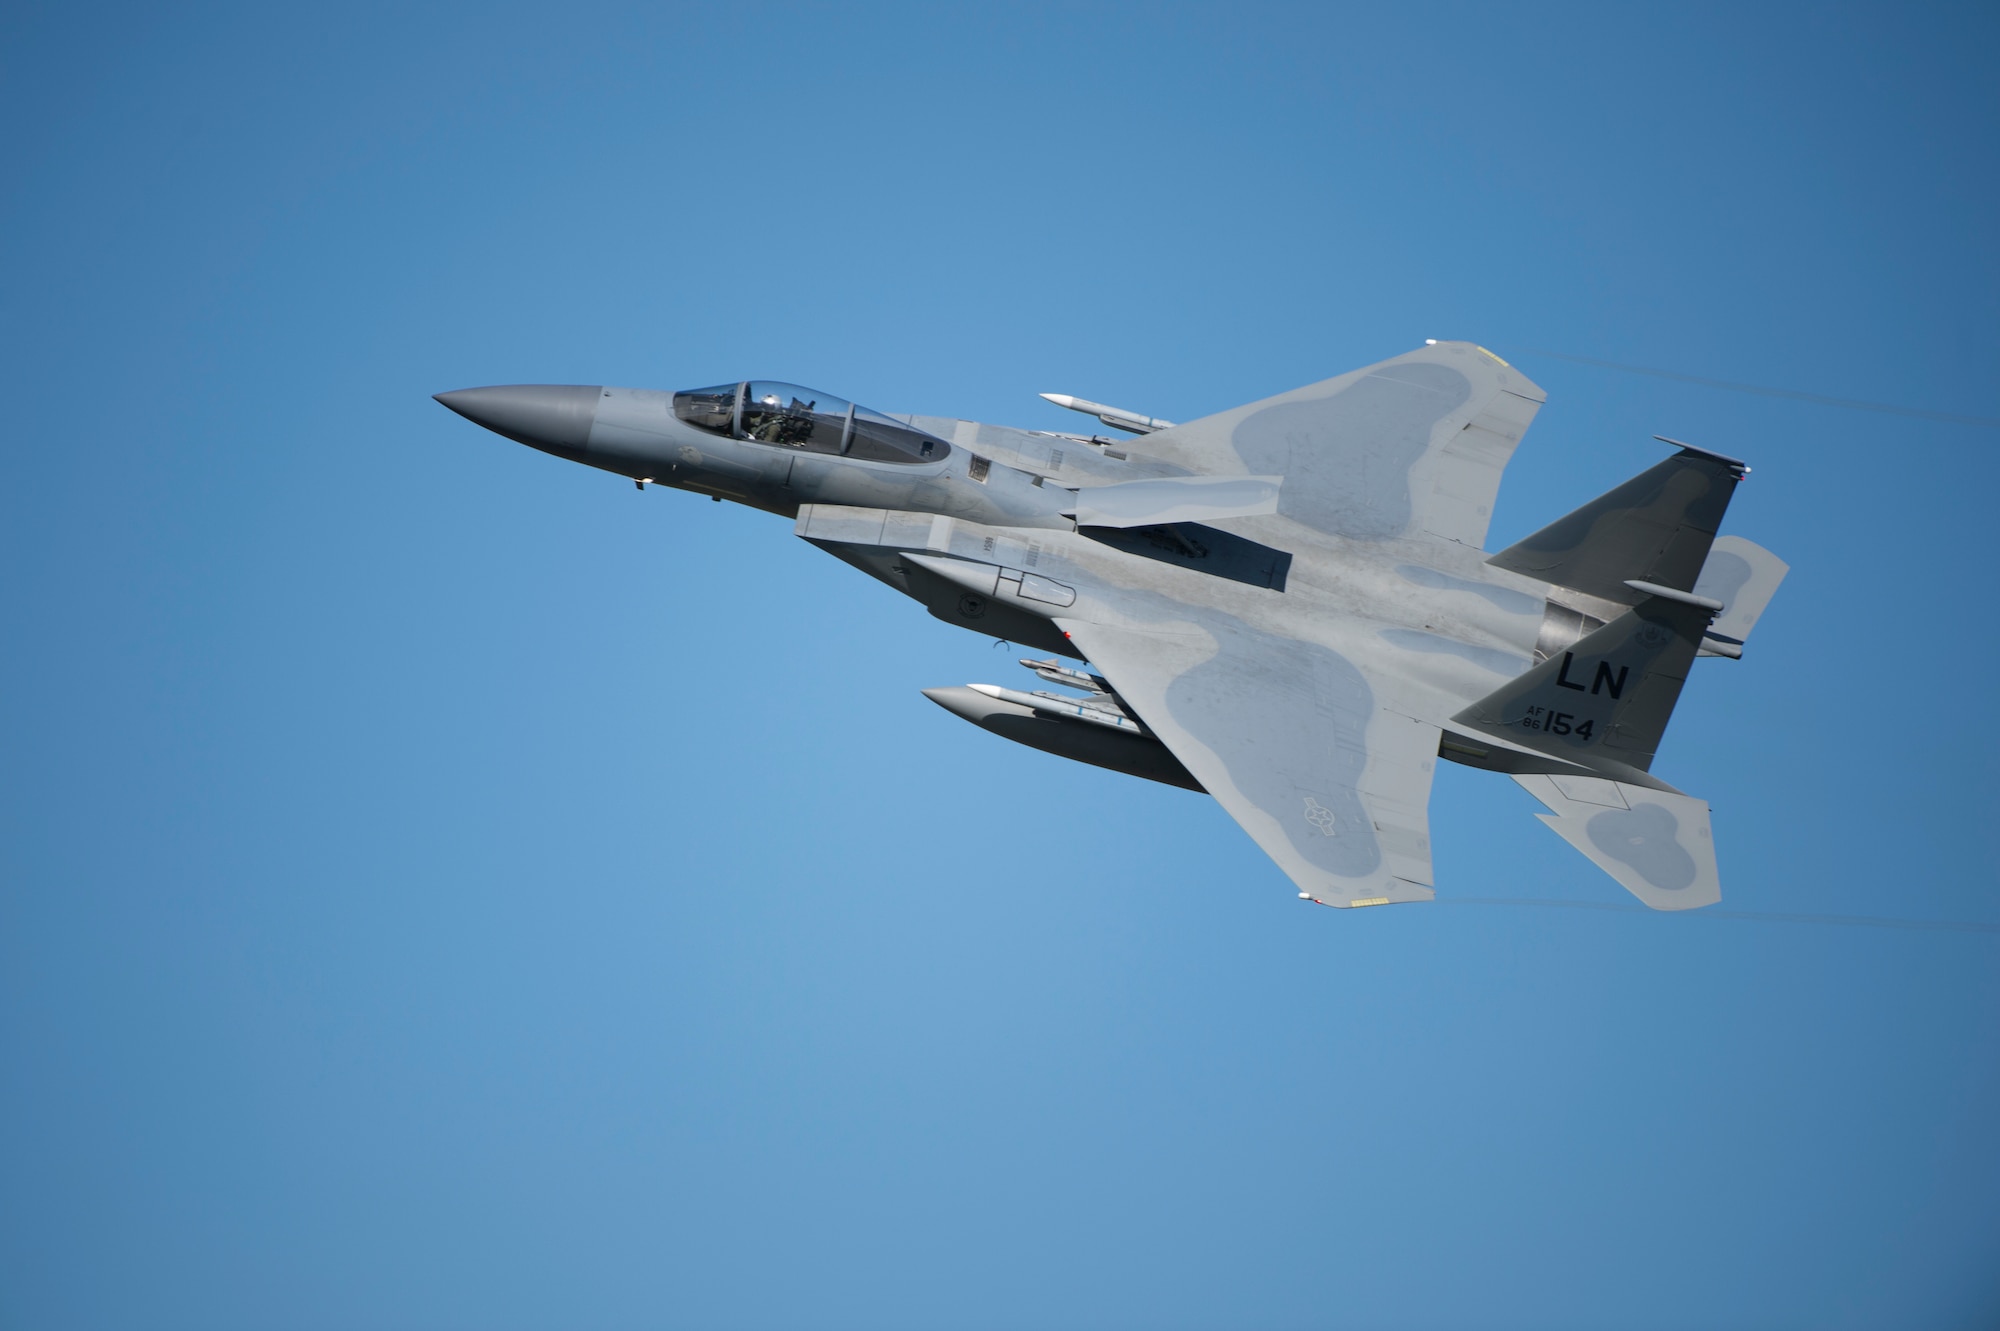 An F-15C Eagle assigned to the 493rd Fighter Squadron flies above Royal Air Force Lakenheath, England, April 5, 2018. The squadron maintains the ability to rapidly generate, deploy and sustain operations to execute wartime and peacetime taskings in any theater of operations around the world. (U.S. Air Force photo/ Senior Airman Malcolm Mayfield)